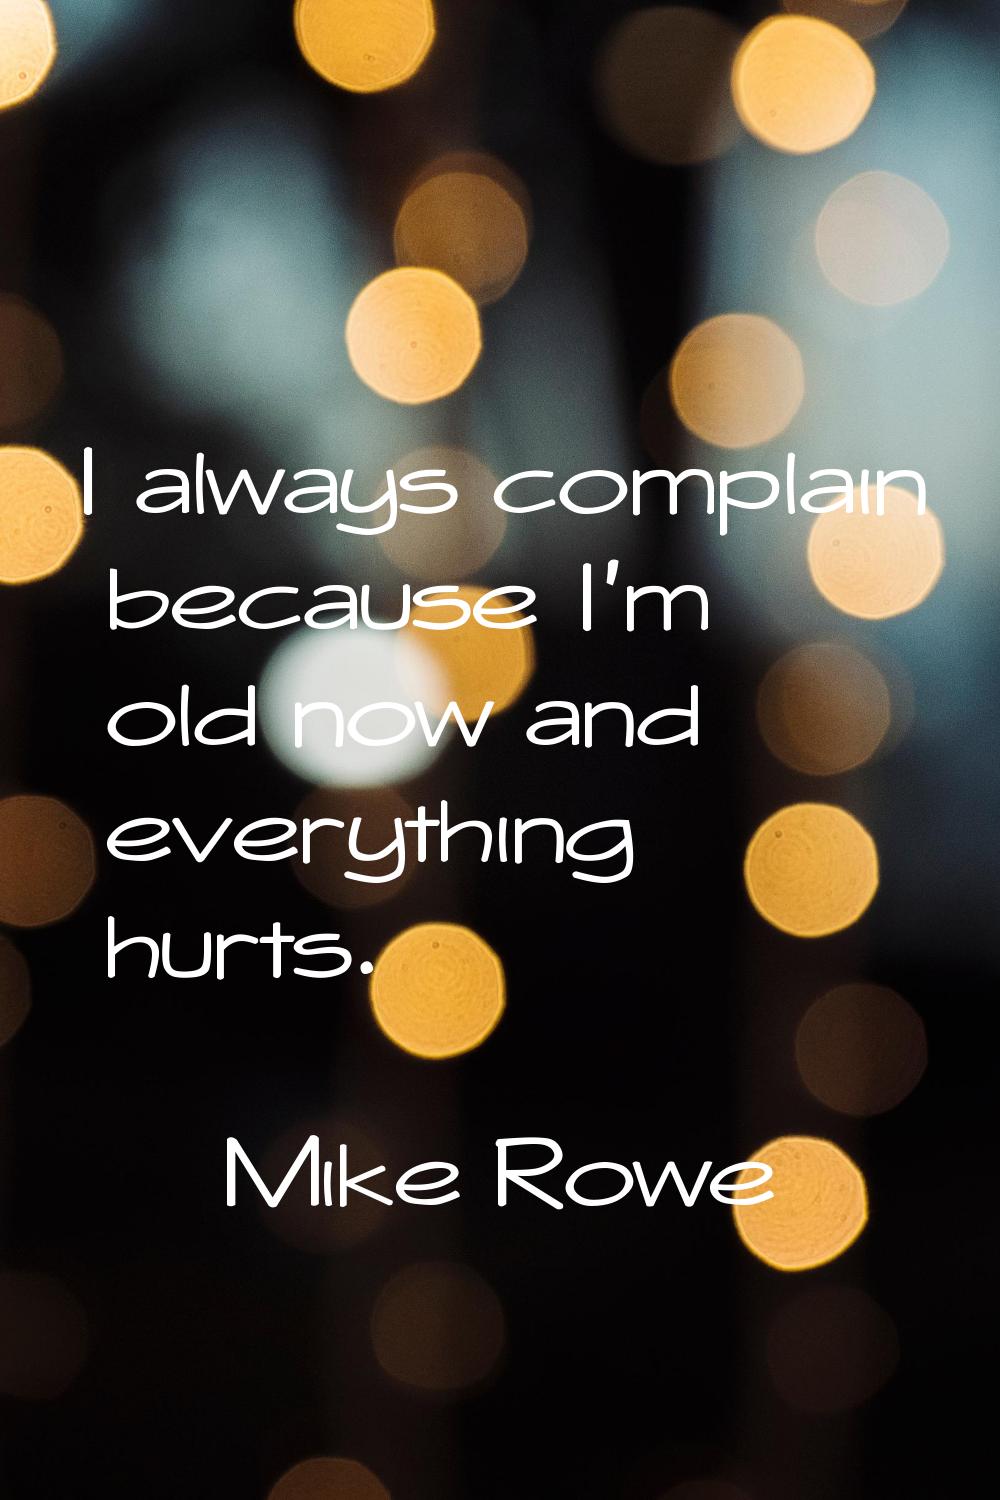 I always complain because I'm old now and everything hurts.